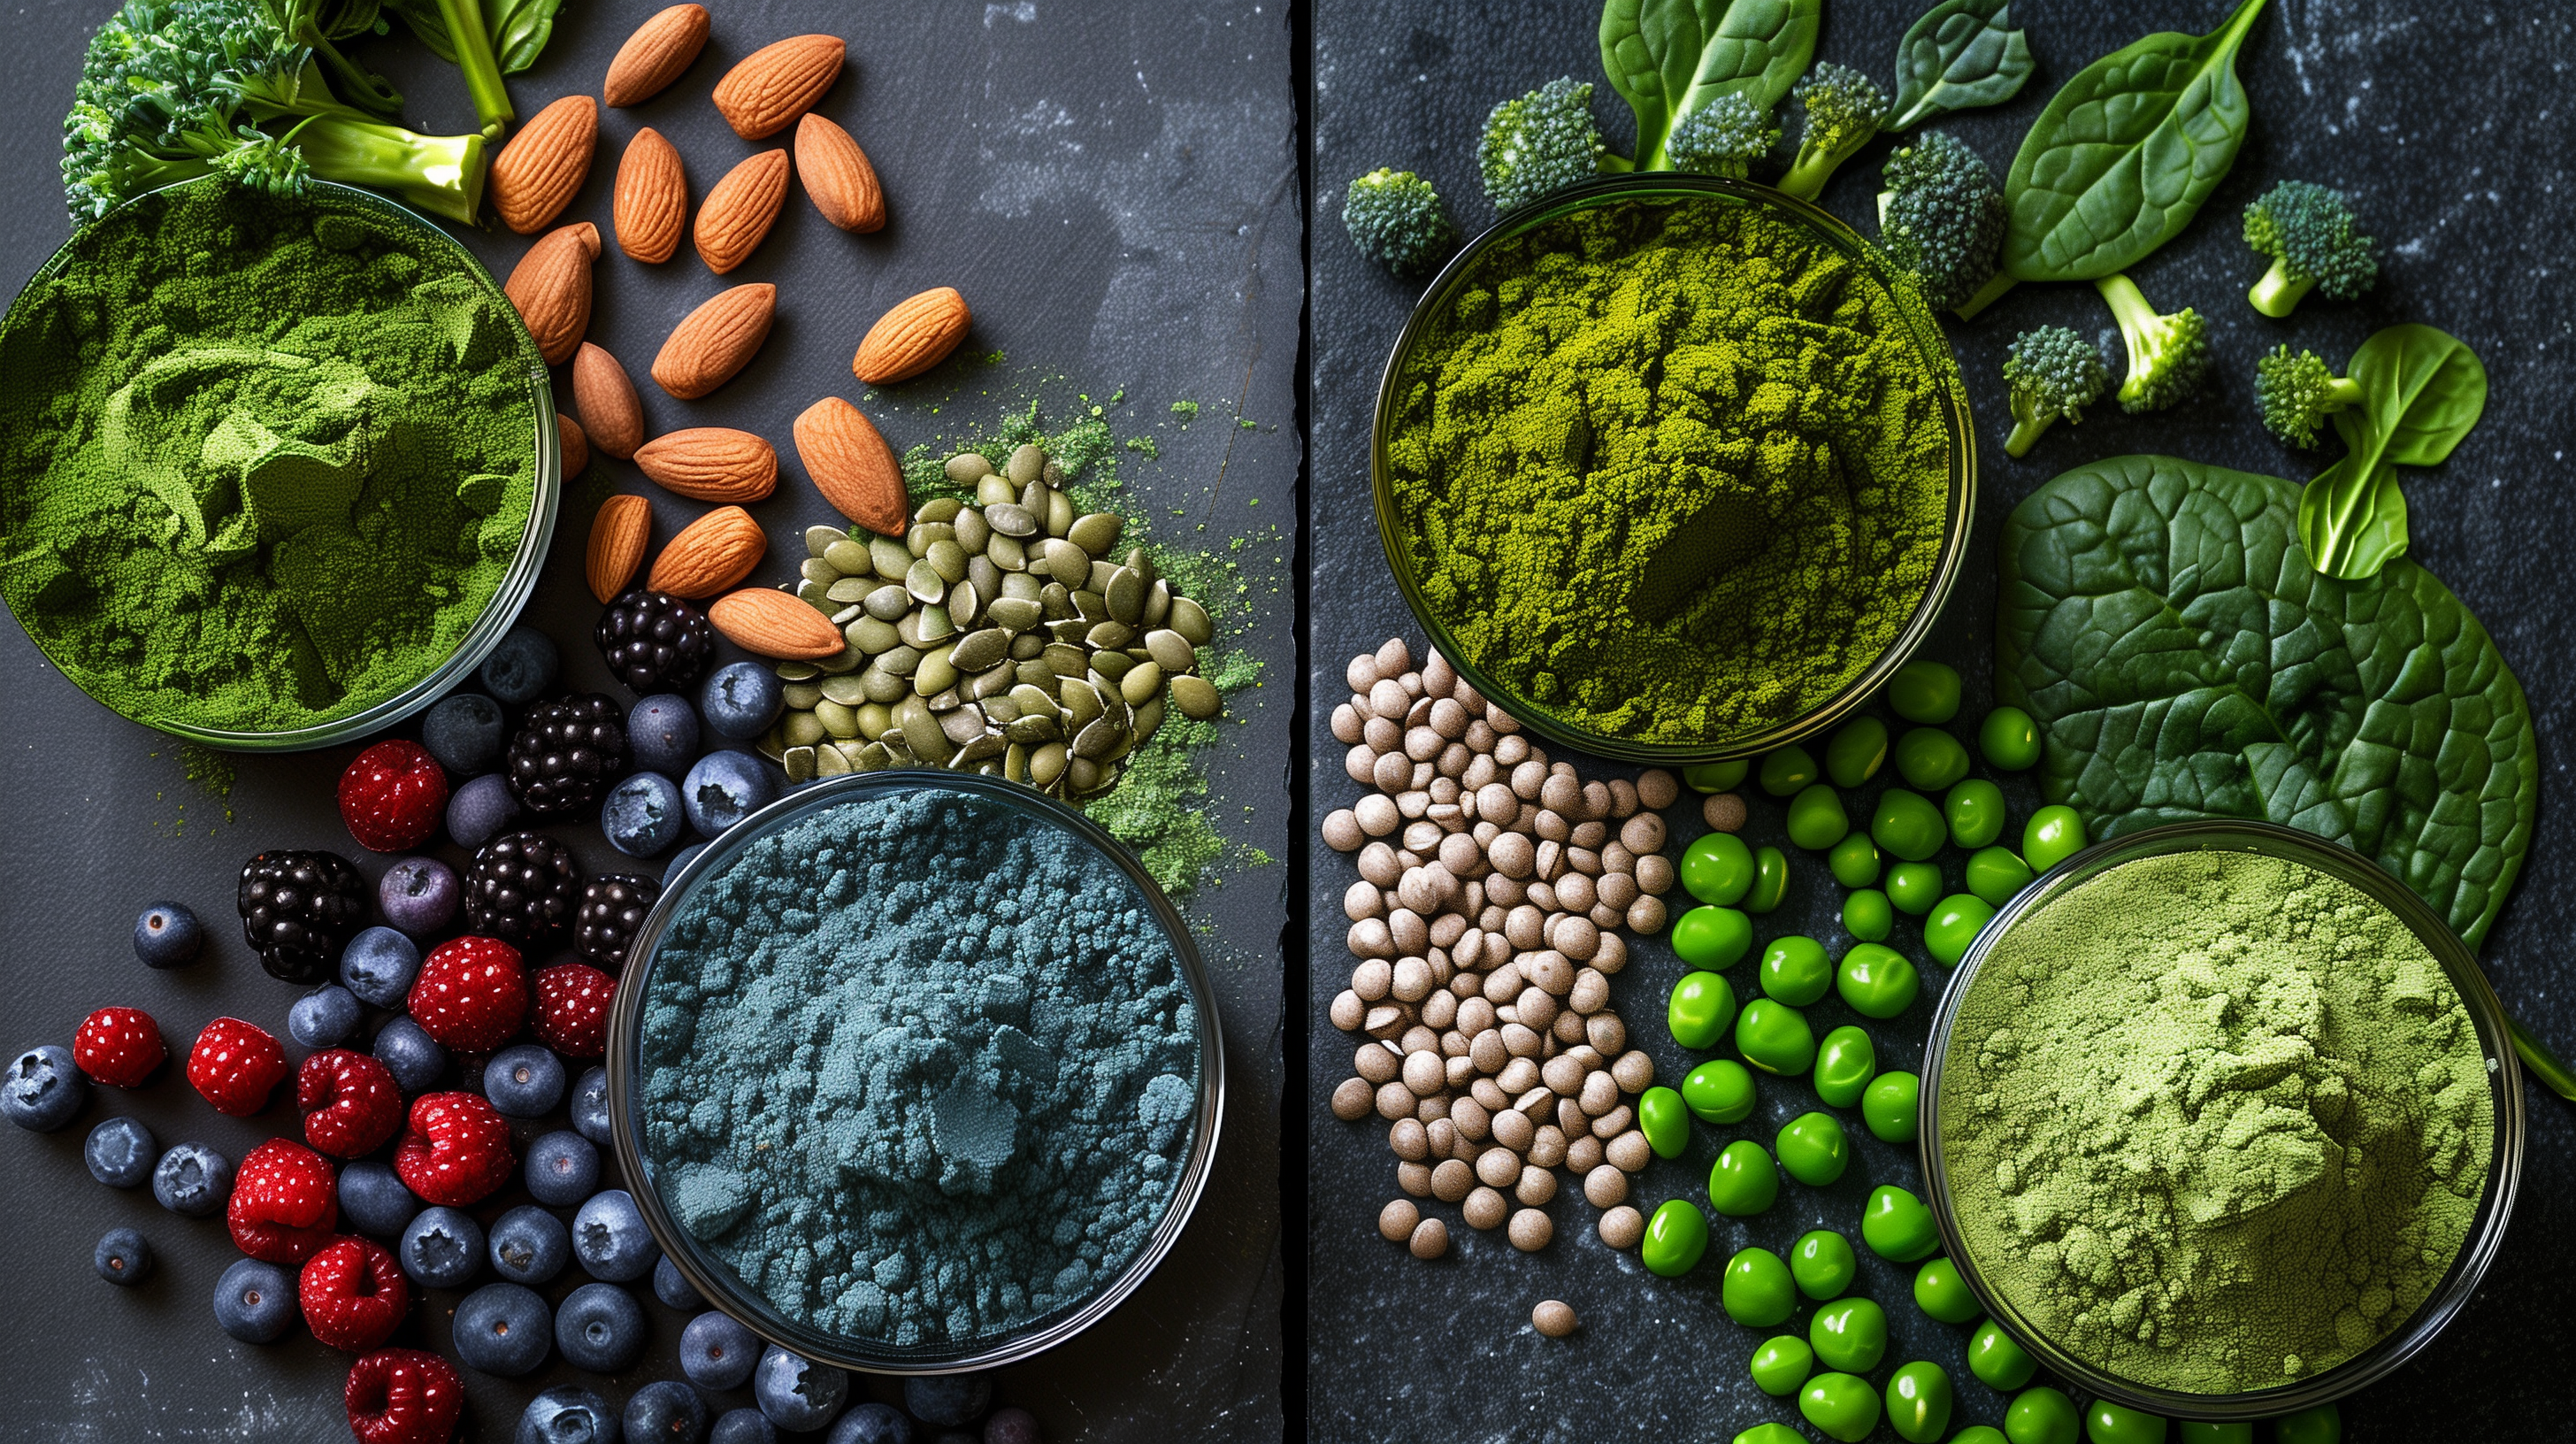 two halves: on the left, vibrant mixed superfood powders; on the right, lush greens powders